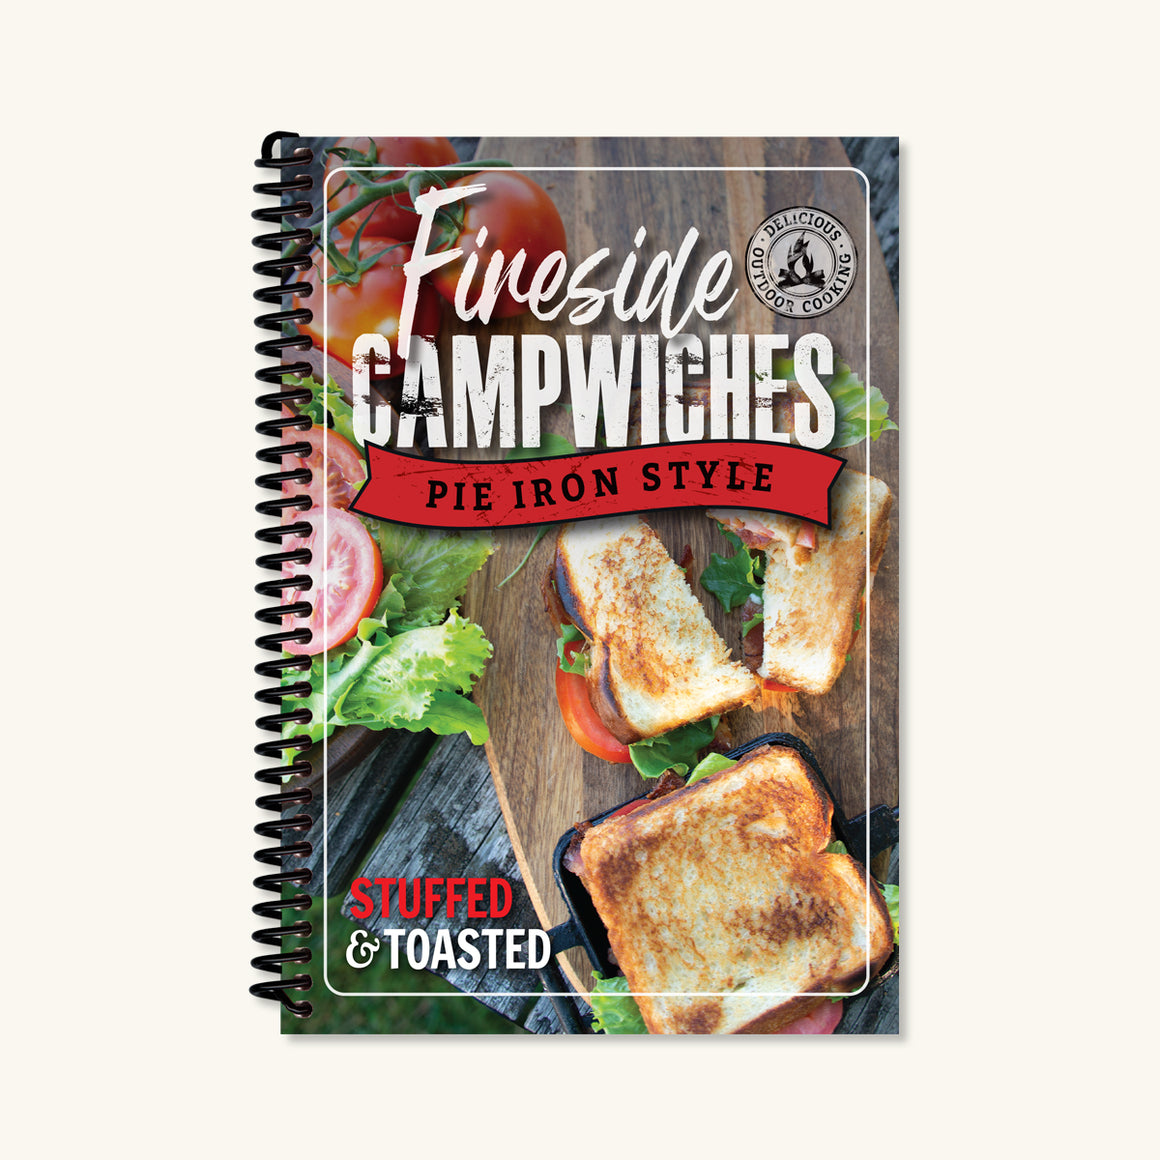 Fireside Campwiches - Pie Iron Style